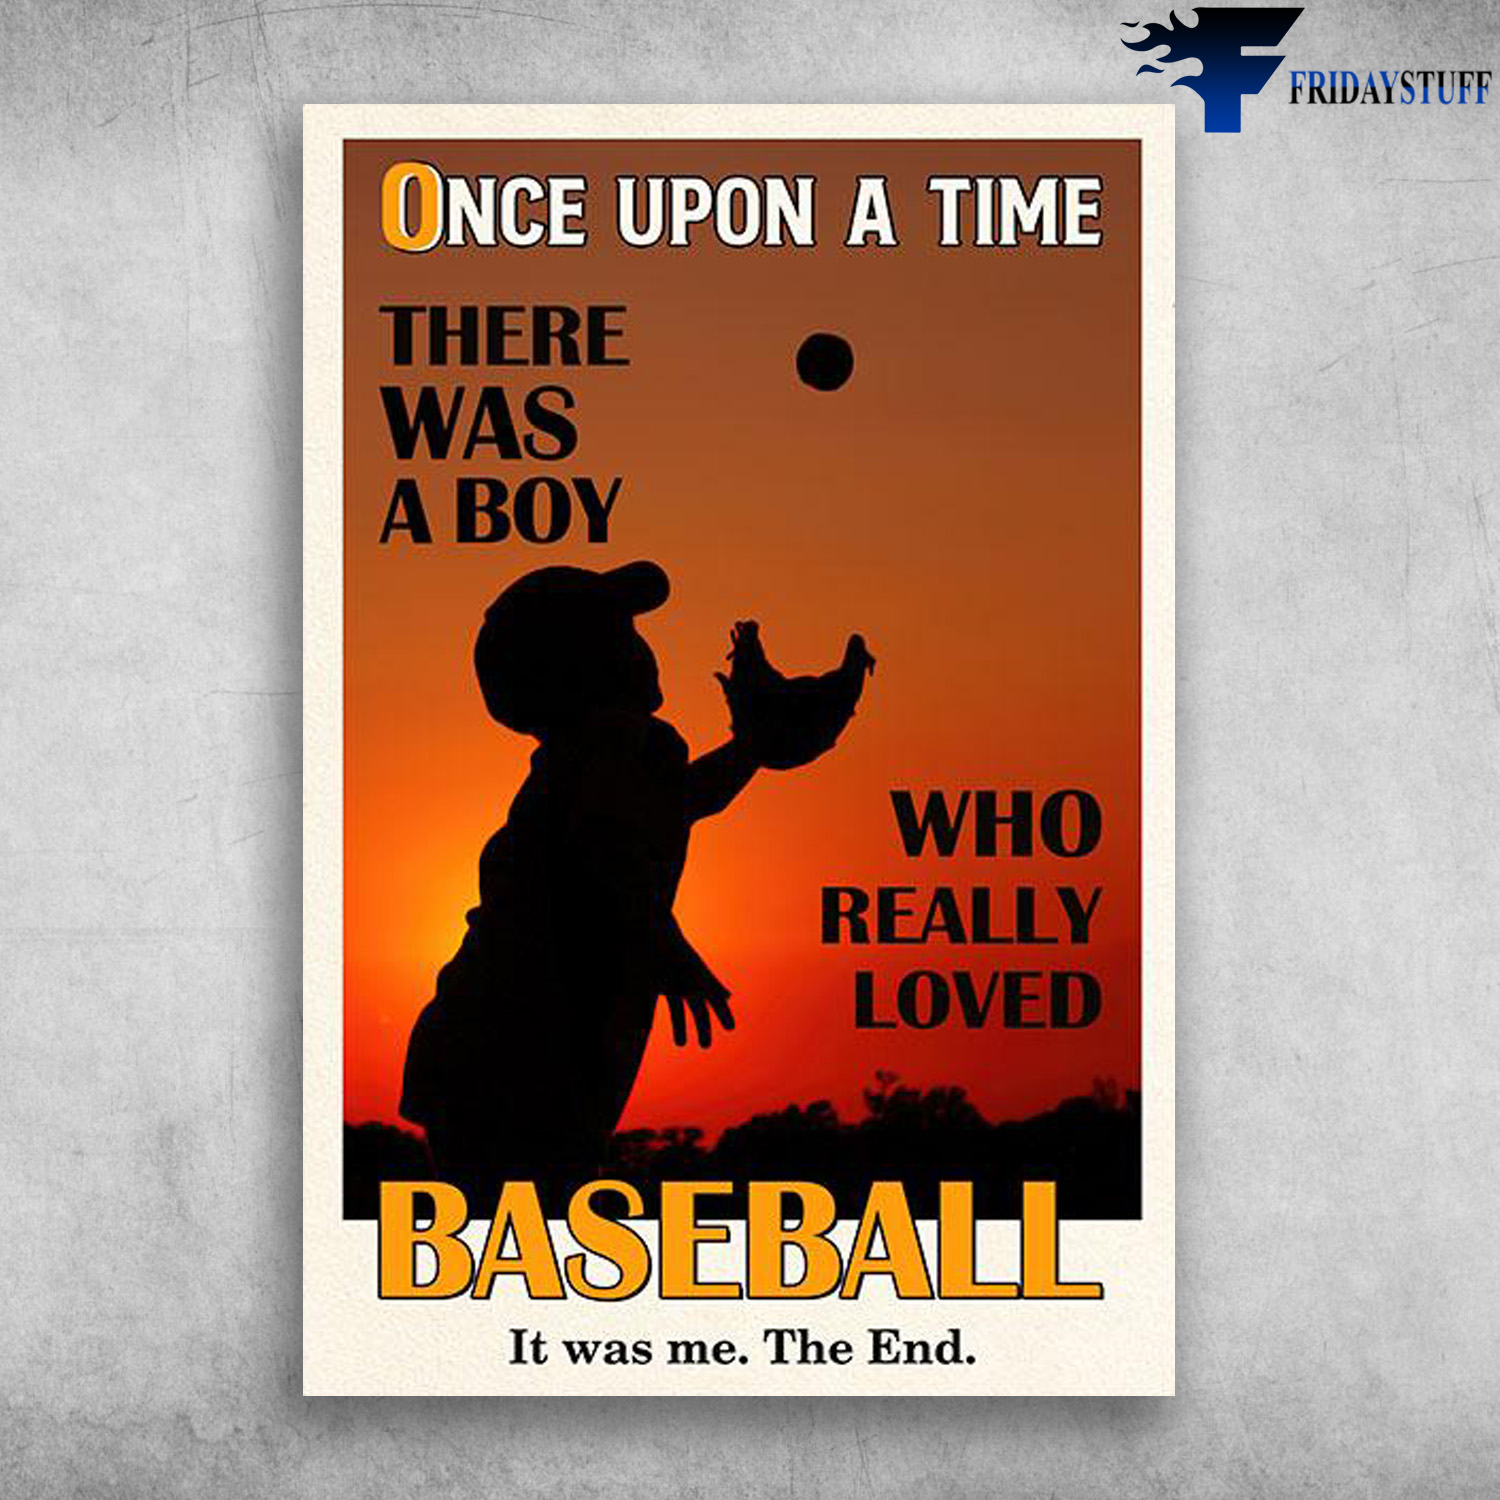 The Boy Baseball - Once Upon A Time, There Was A Boy, Who Really Loved Baseball, It Was Me, The End